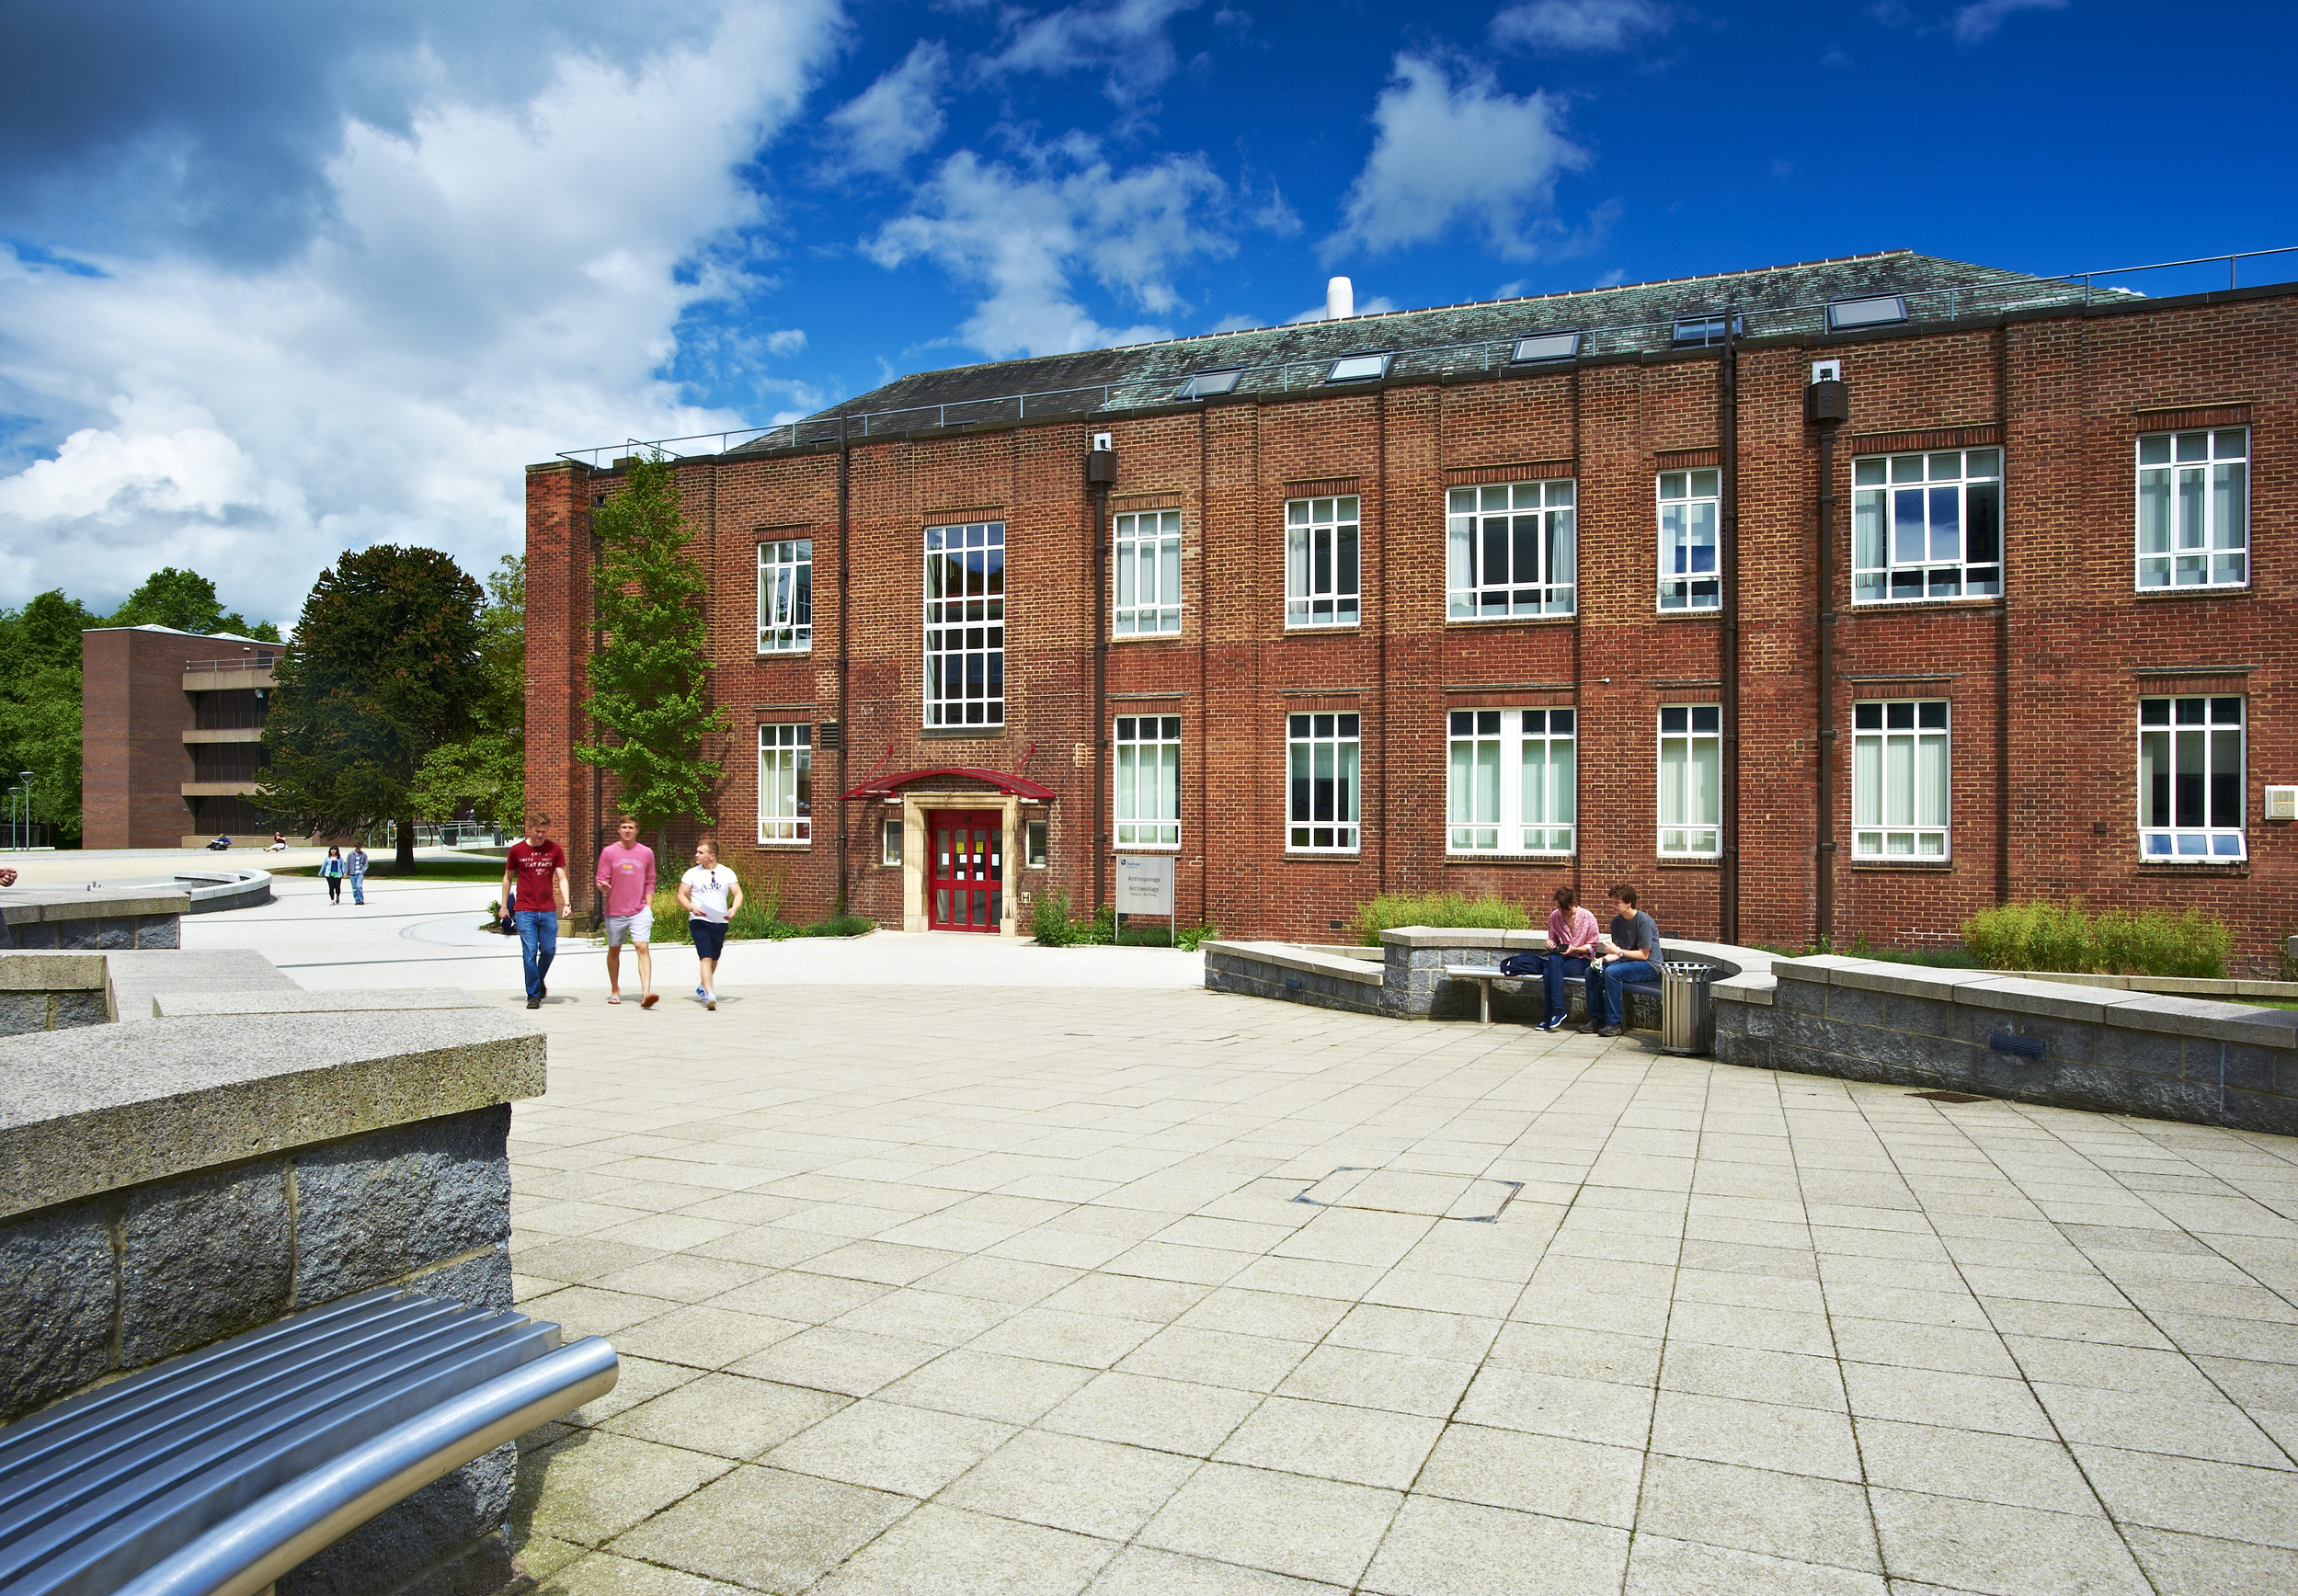 Exterior of the Dawson Building on the Durham University campus